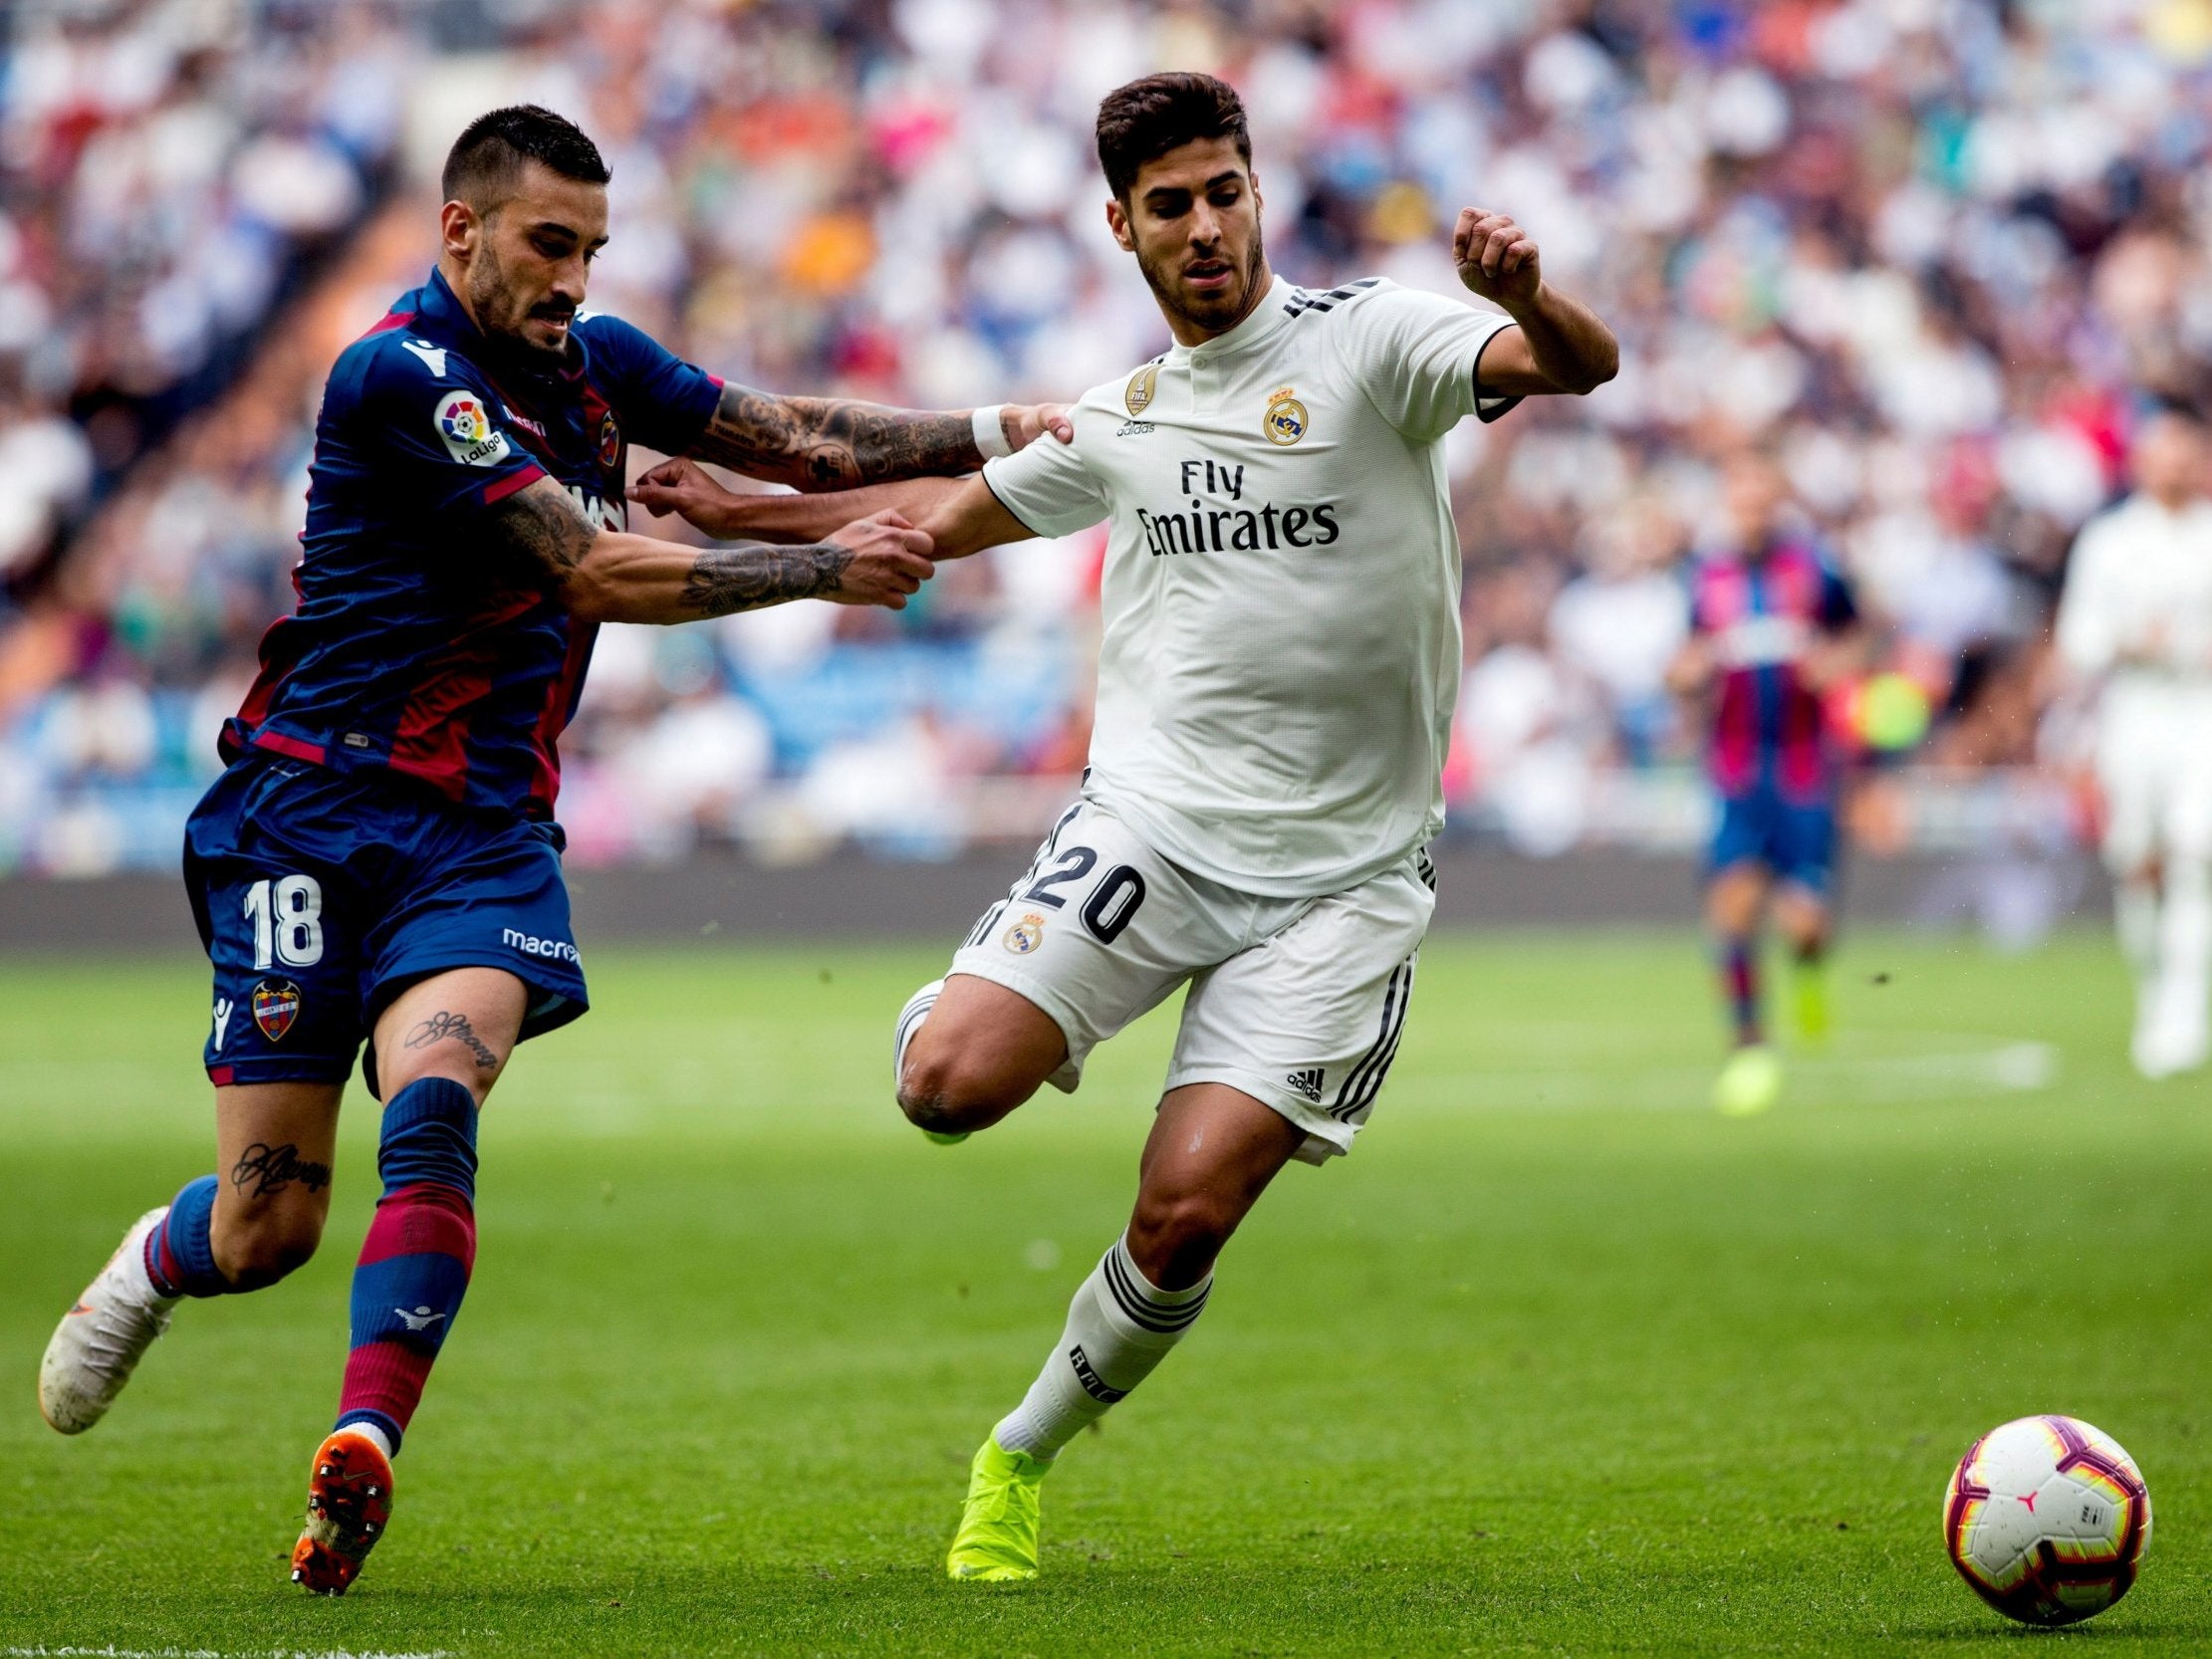 Marco Asensio is Real Madrid's rising talent